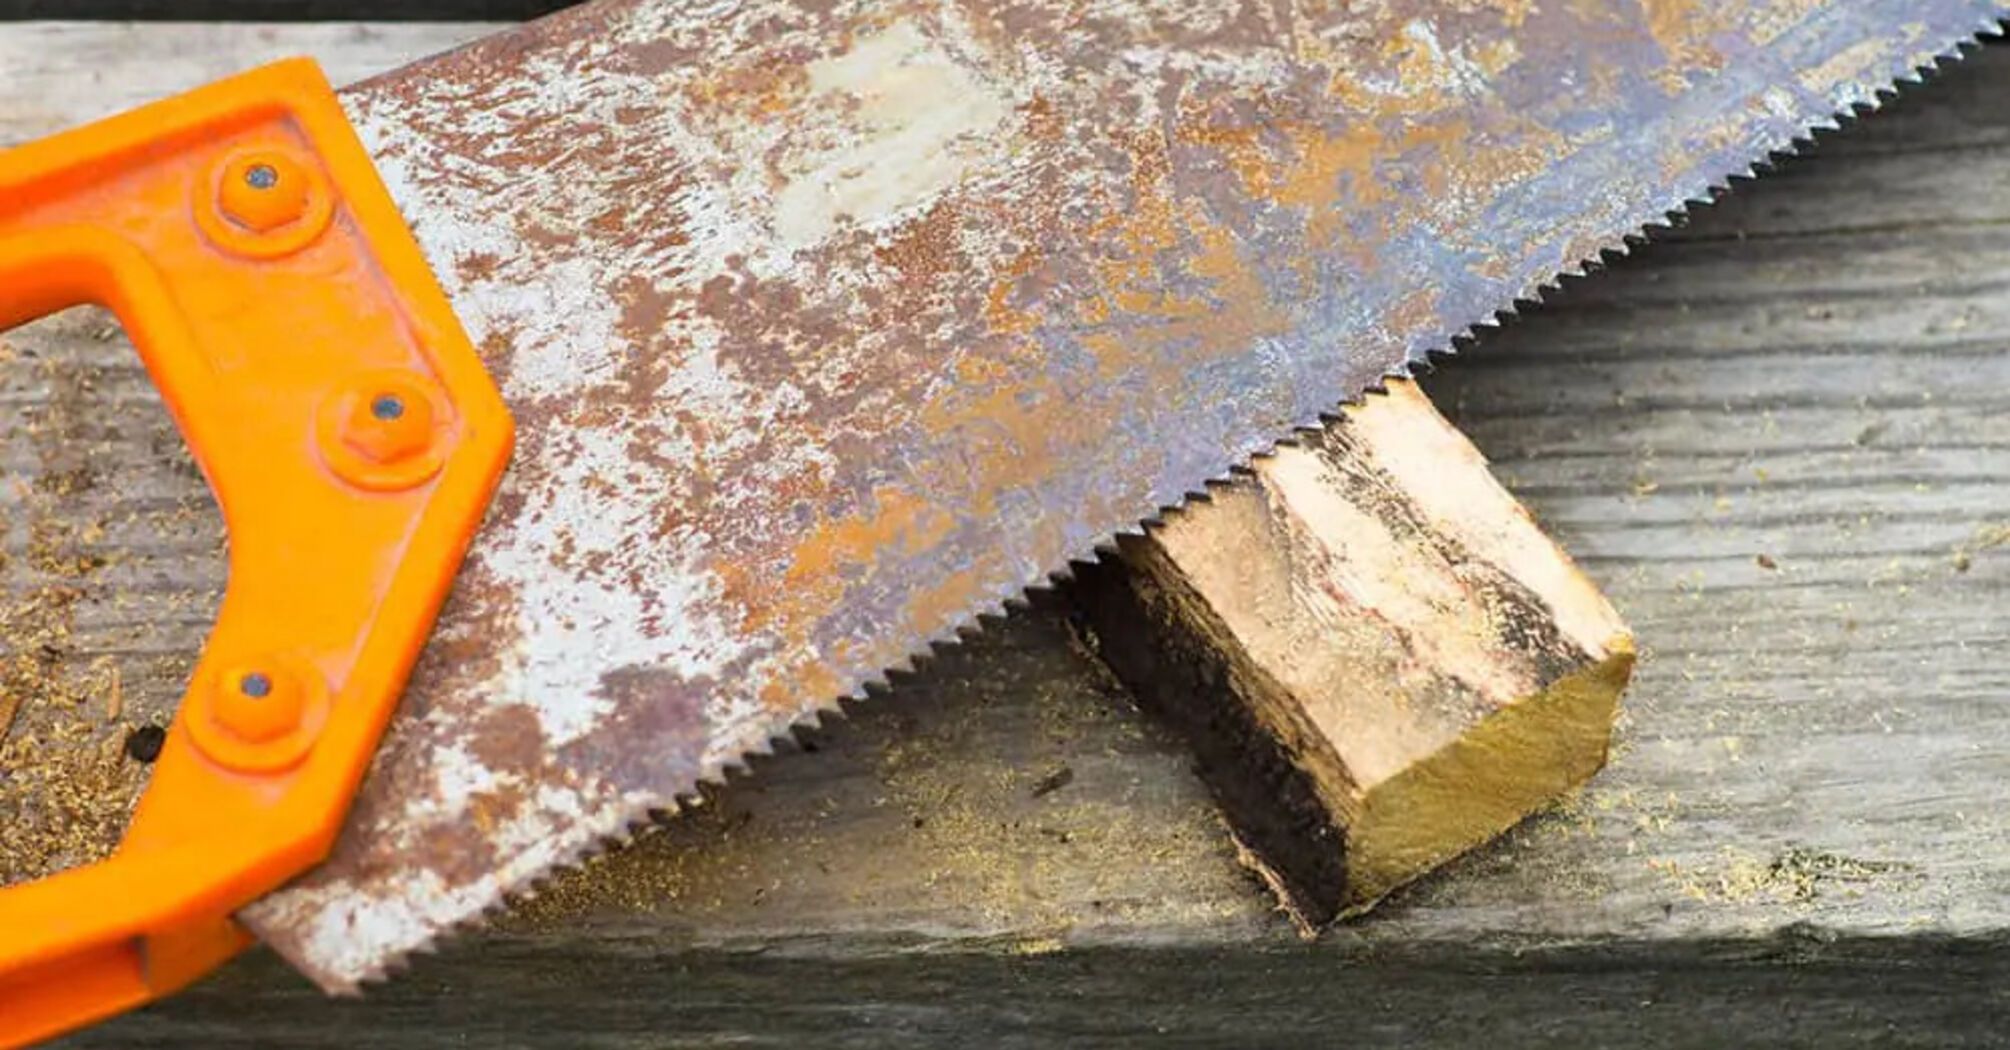 How to remove rust from metal quickly and efficiently